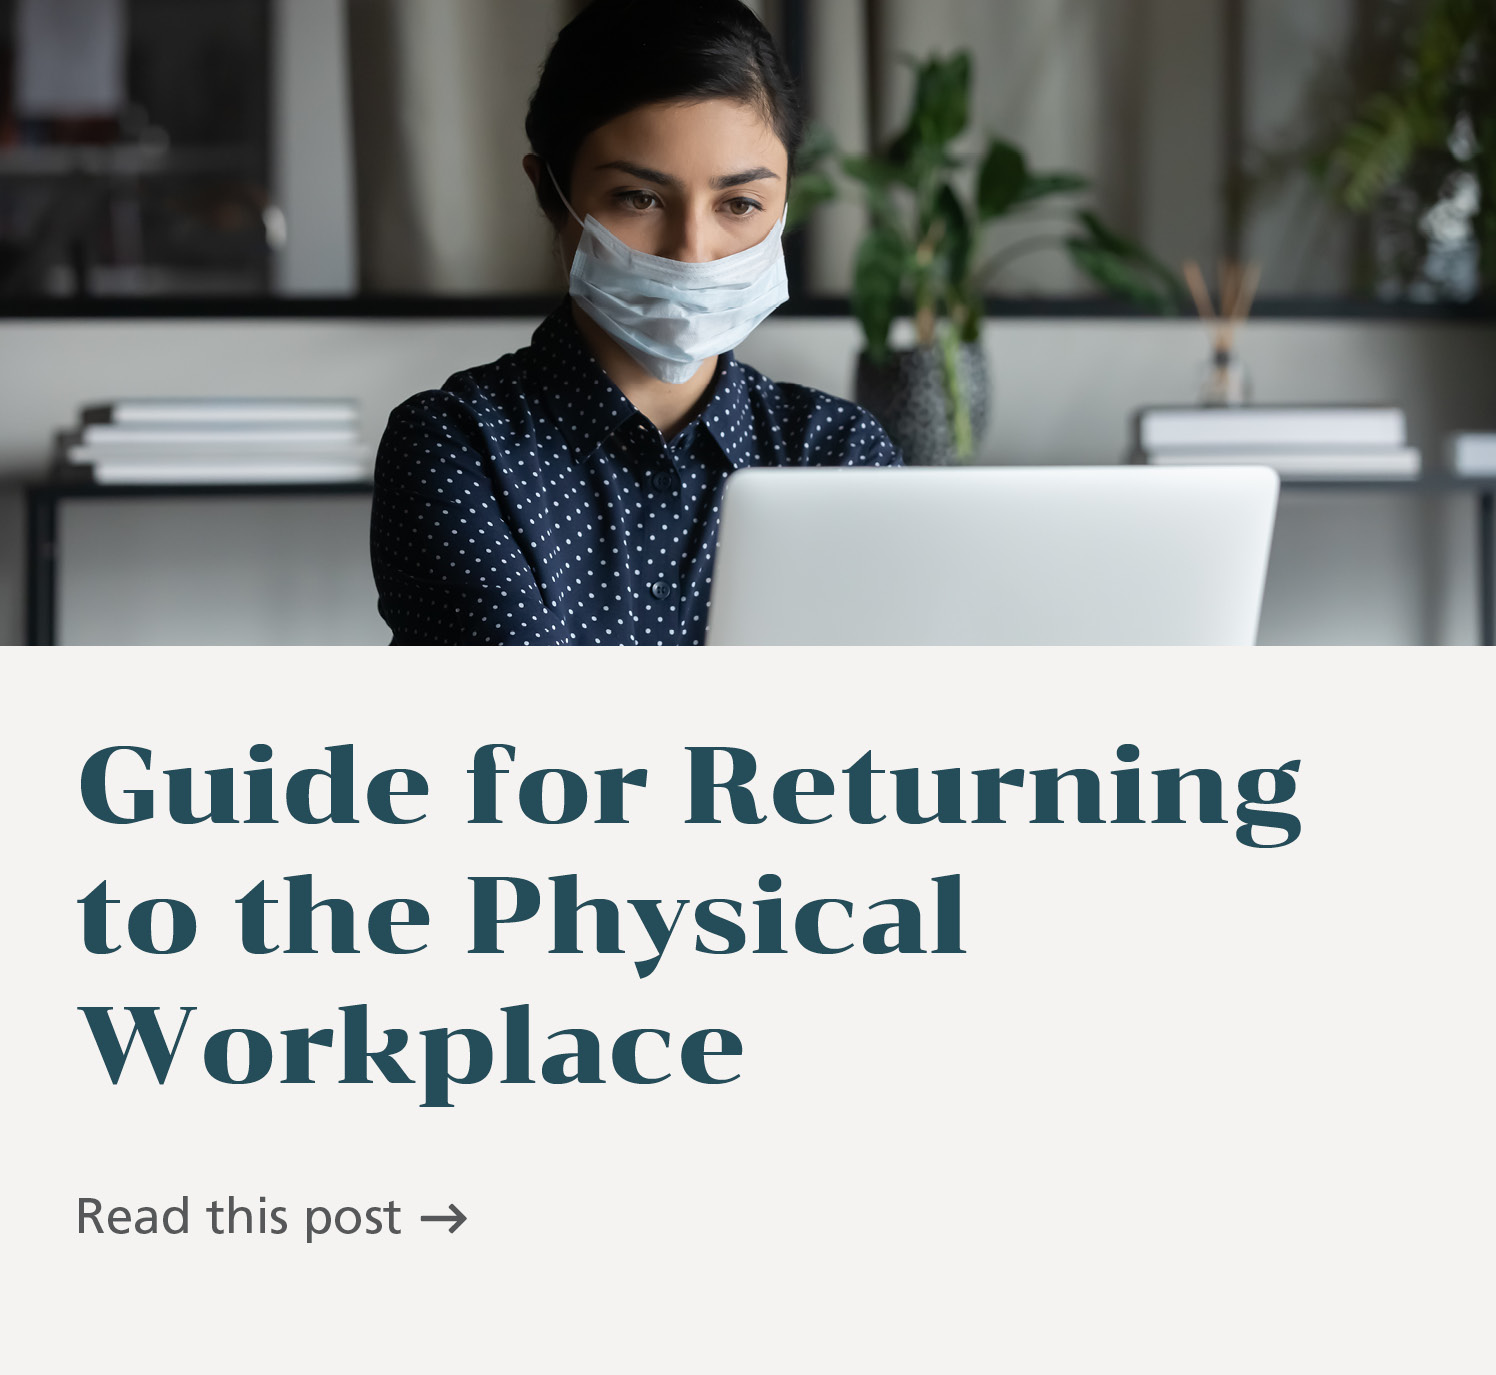 Guide for returning to the physical workplace.